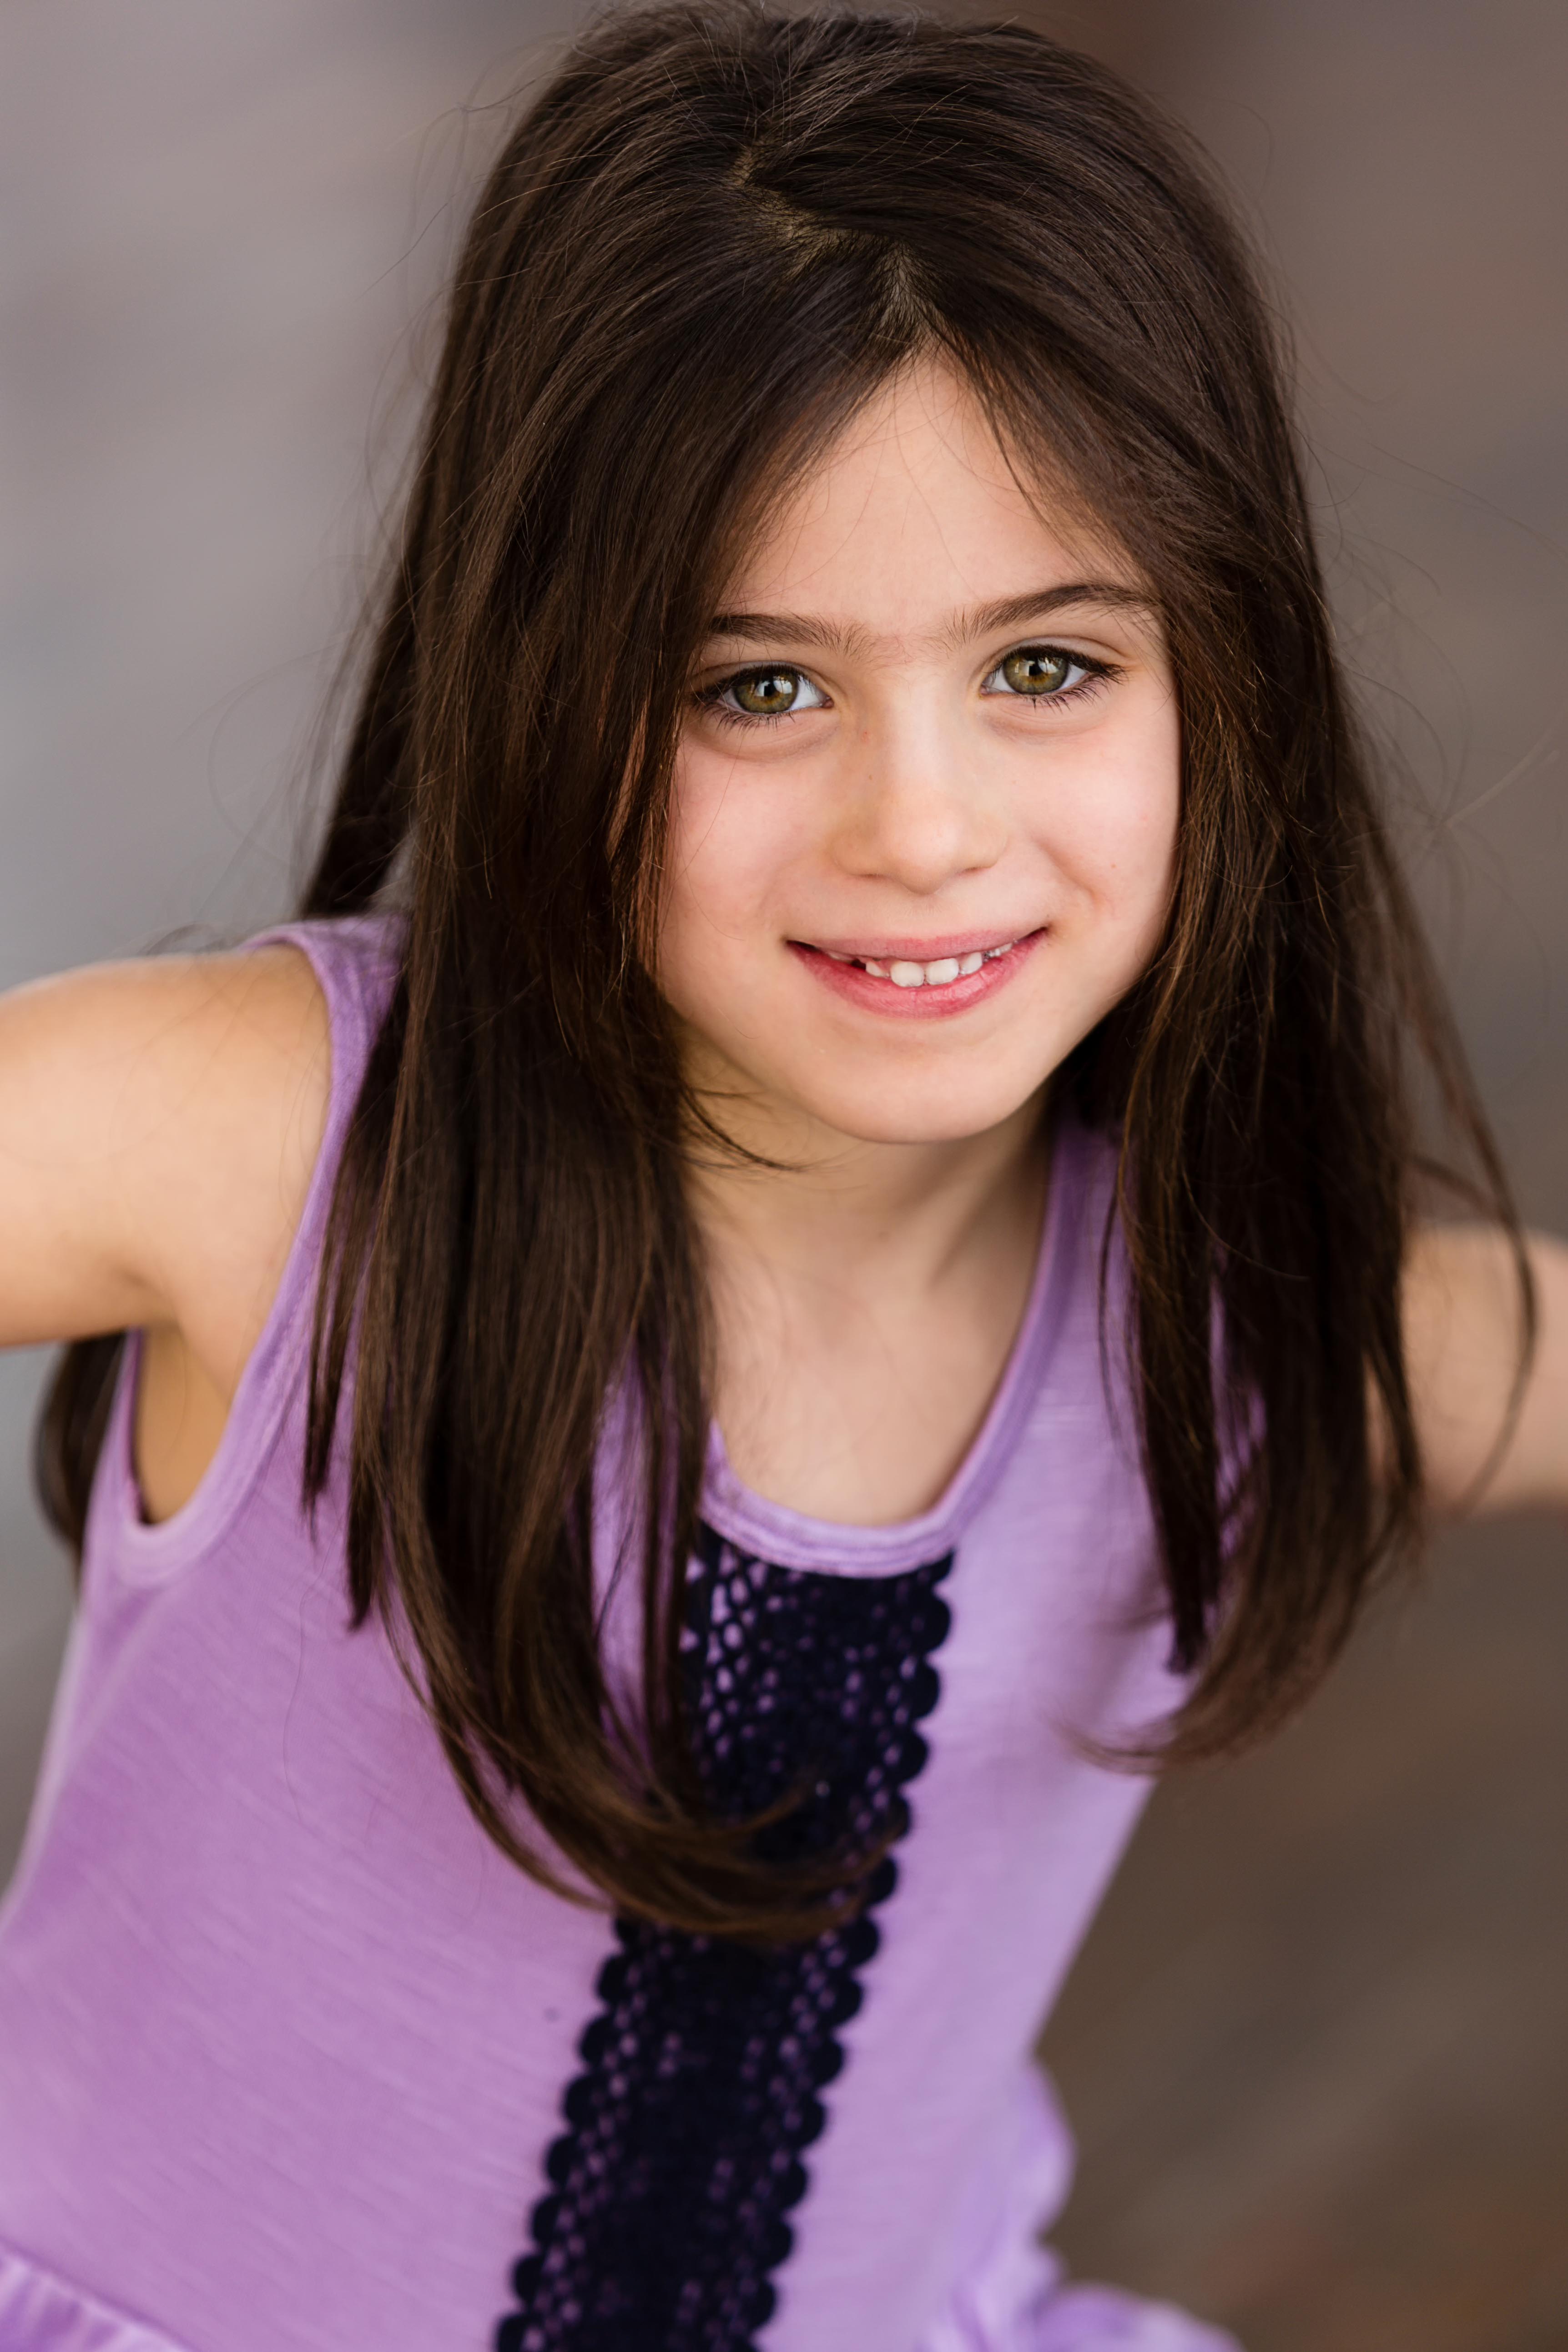 Kids (Actors and Models) | Kelly Williams Photography